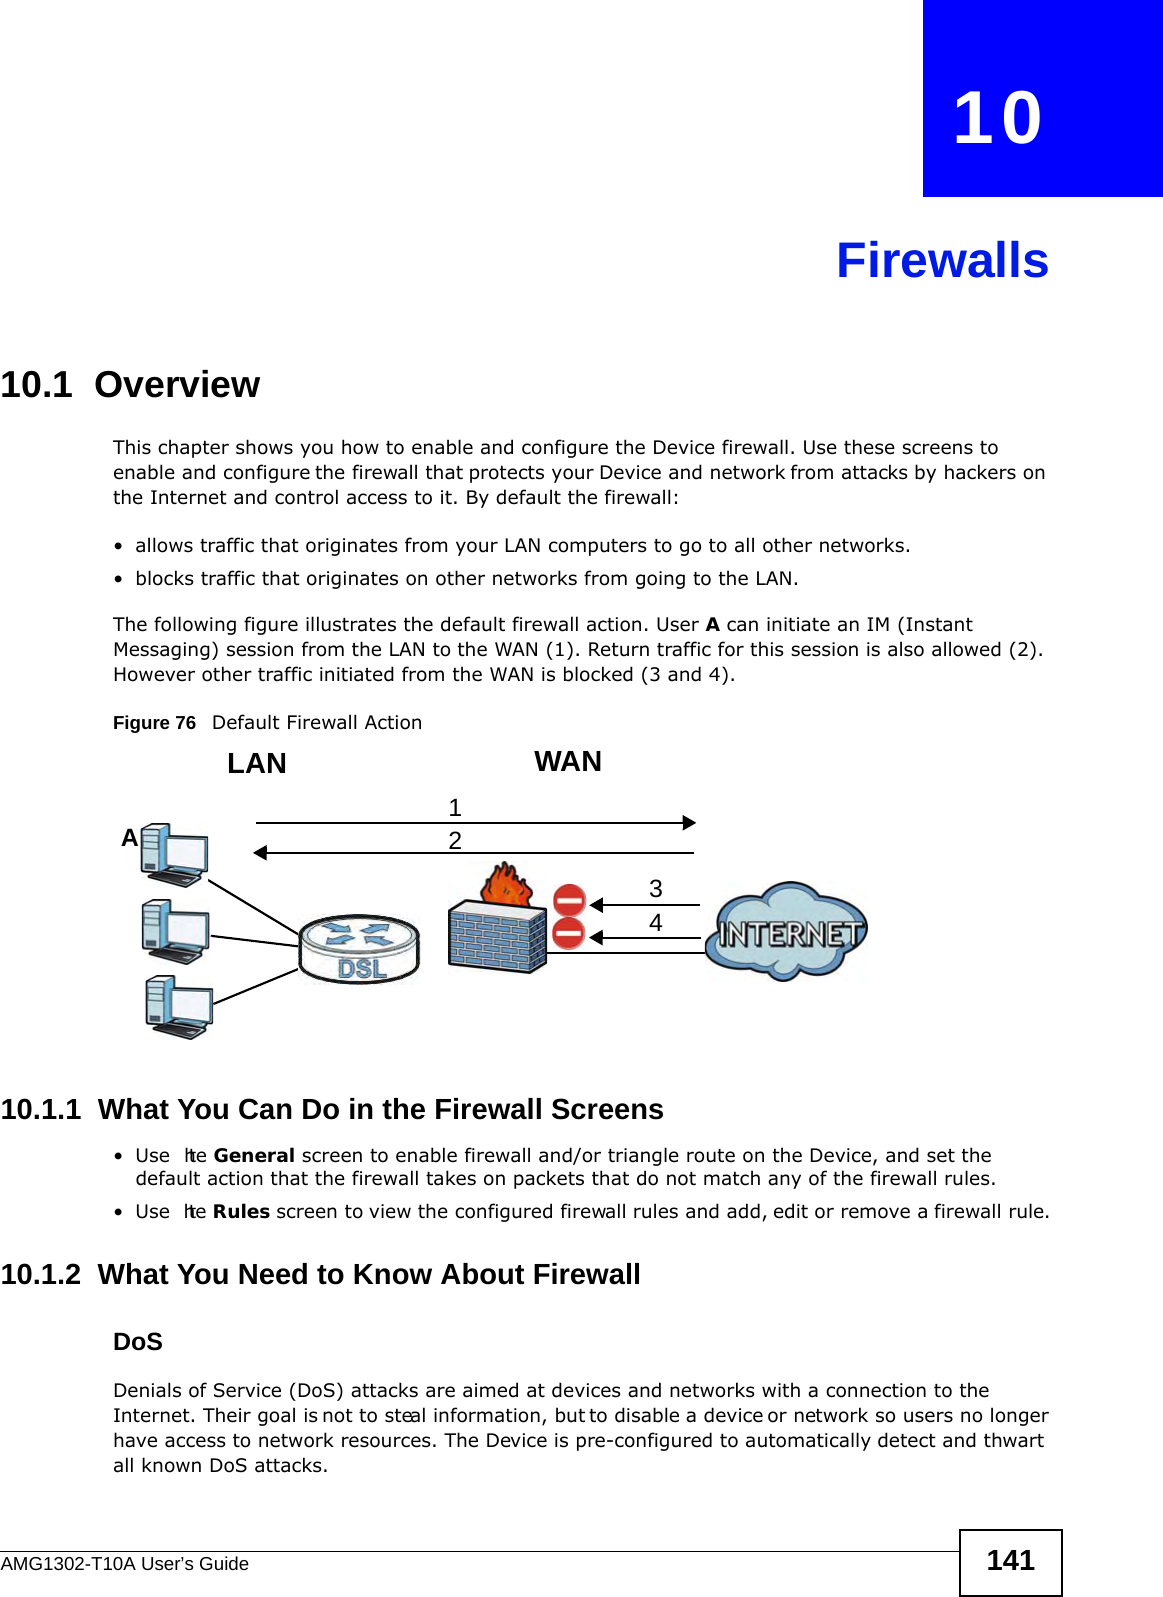 AMG1302-T10A User’s Guide 141CHAPTER   10Firewalls10.1  OverviewThis chapter shows you how to enable and configure the Device firewall. Use these screens to enable and configure the firewall that protects your Device and network from attacks by hackers on the Internet and control access to it. By default the firewall:• allows traffic that originates from your LAN computers to go to all other networks. • blocks traffic that originates on other networks from going to the LAN. The following figure illustrates the default firewall action. User A can initiate an IM (Instant Messaging) session from the LAN to the WAN (1). Return traffic for this session is also allowed (2). However other traffic initiated from the WAN is blocked (3 and 4).Figure 76   Default Firewall Action10.1.1  What You Can Do in the Firewall Screens•Use  the General screen to enable firewall and/or triangle route on the Device, and set the default action that the firewall takes on packets that do not match any of the firewall rules.•Use  the Rules screen to view the configured firewall rules and add, edit or remove a firewall rule.10.1.2  What You Need to Know About FirewallDoSDenials of Service (DoS) attacks are aimed at devices and networks with a connection to the Internet. Their goal is not to steal information, but to disable a device or network so users no longer have access to network resources. The Device is pre-configured to automatically detect and thwart all known DoS attacks.WANLAN3412A